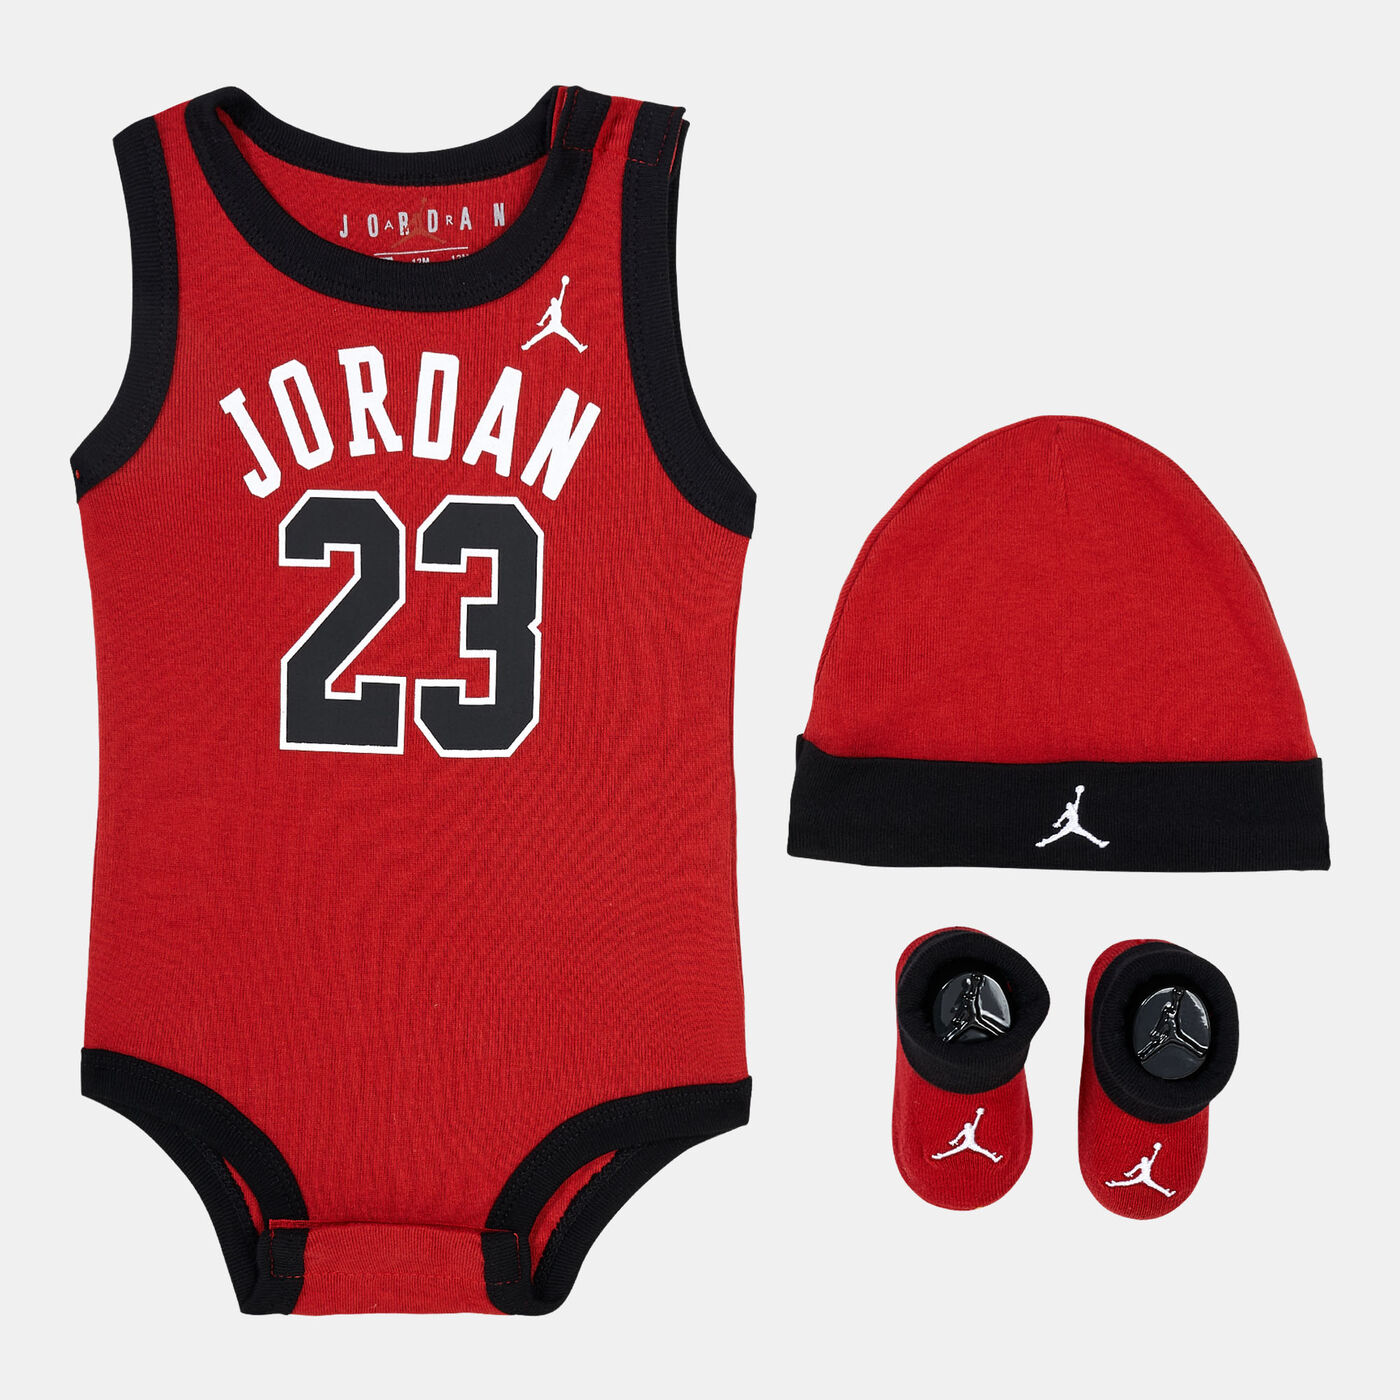 Kids' 23 Jersey 3-Piece Set (Baby and Toddler)